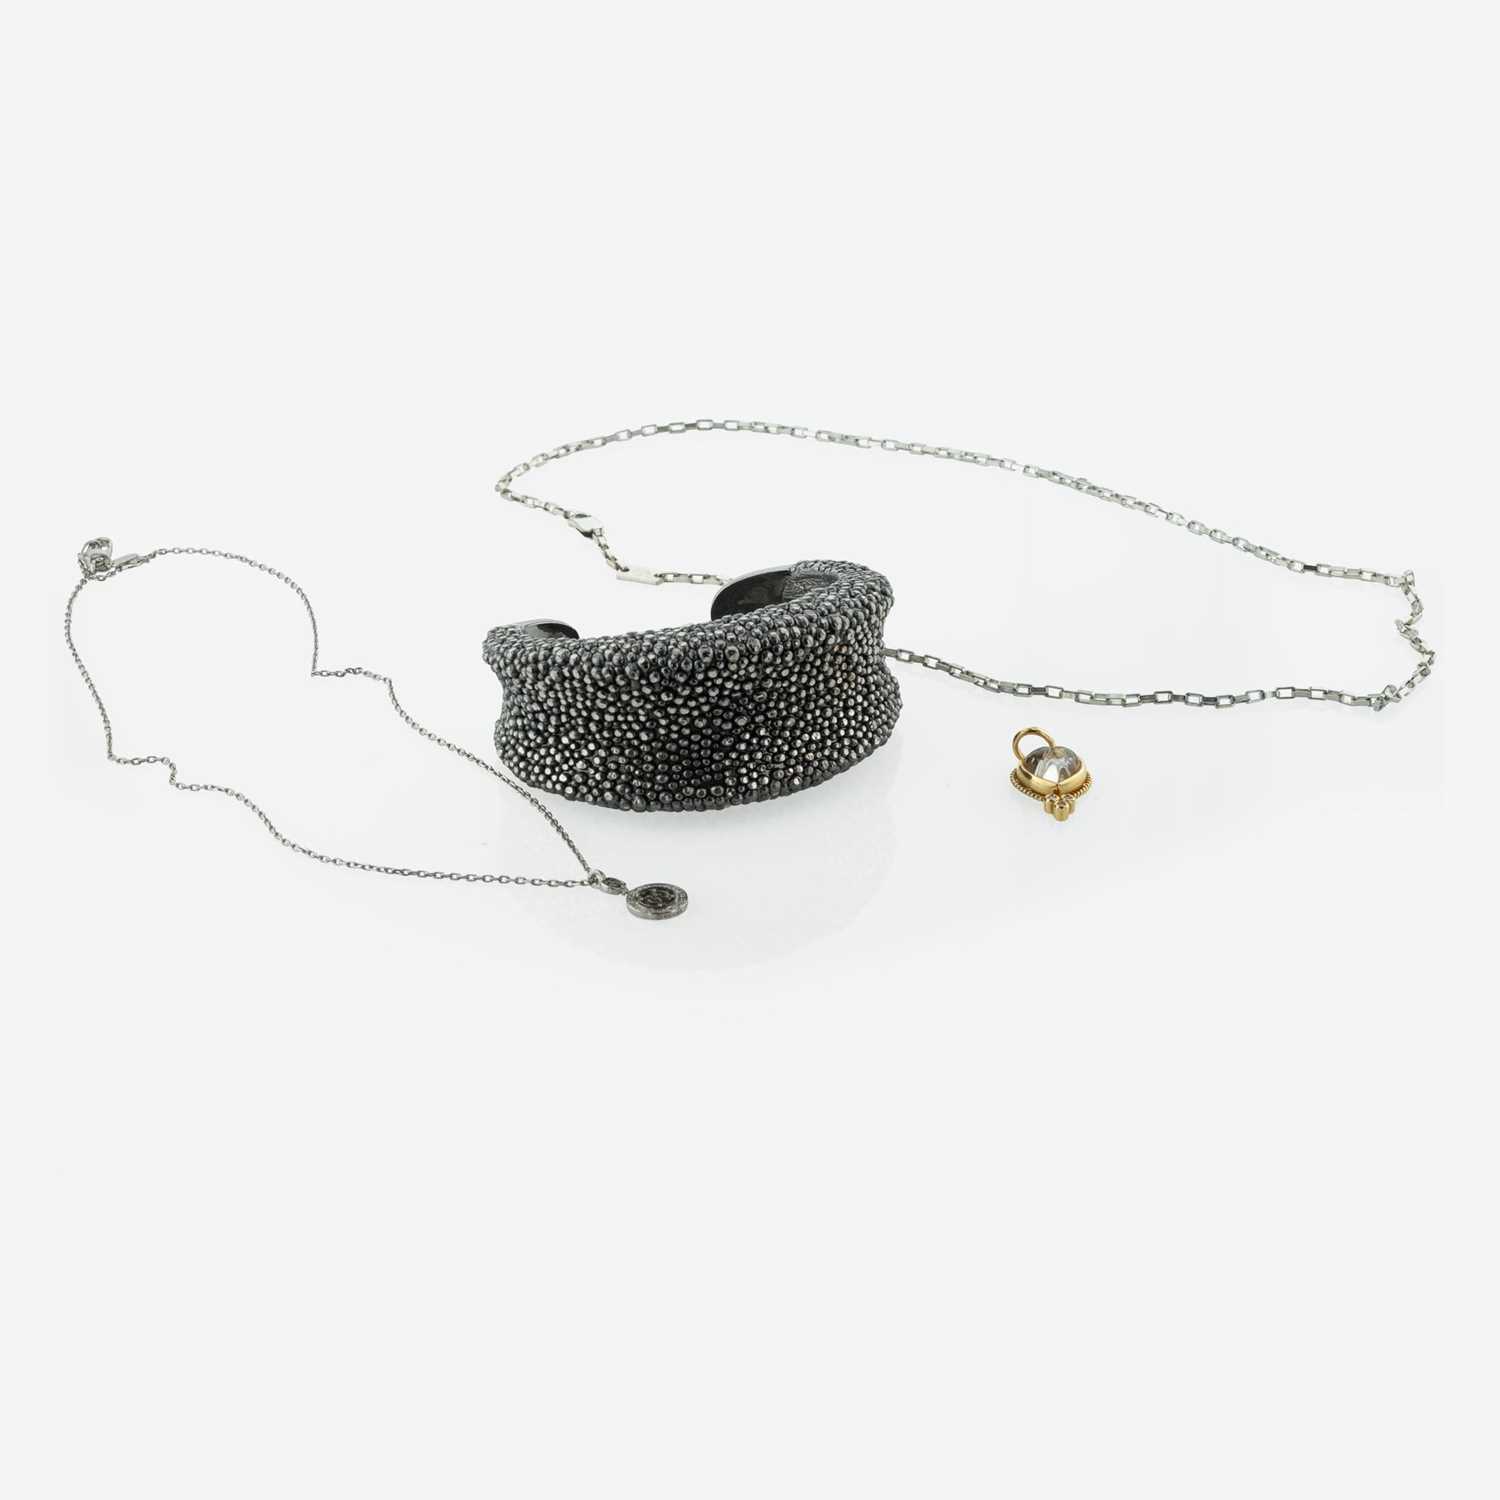 Lot 244 - A Contemporary Collection of Jewelry by Roberto Coin, Gucci, and Temple St. Clair